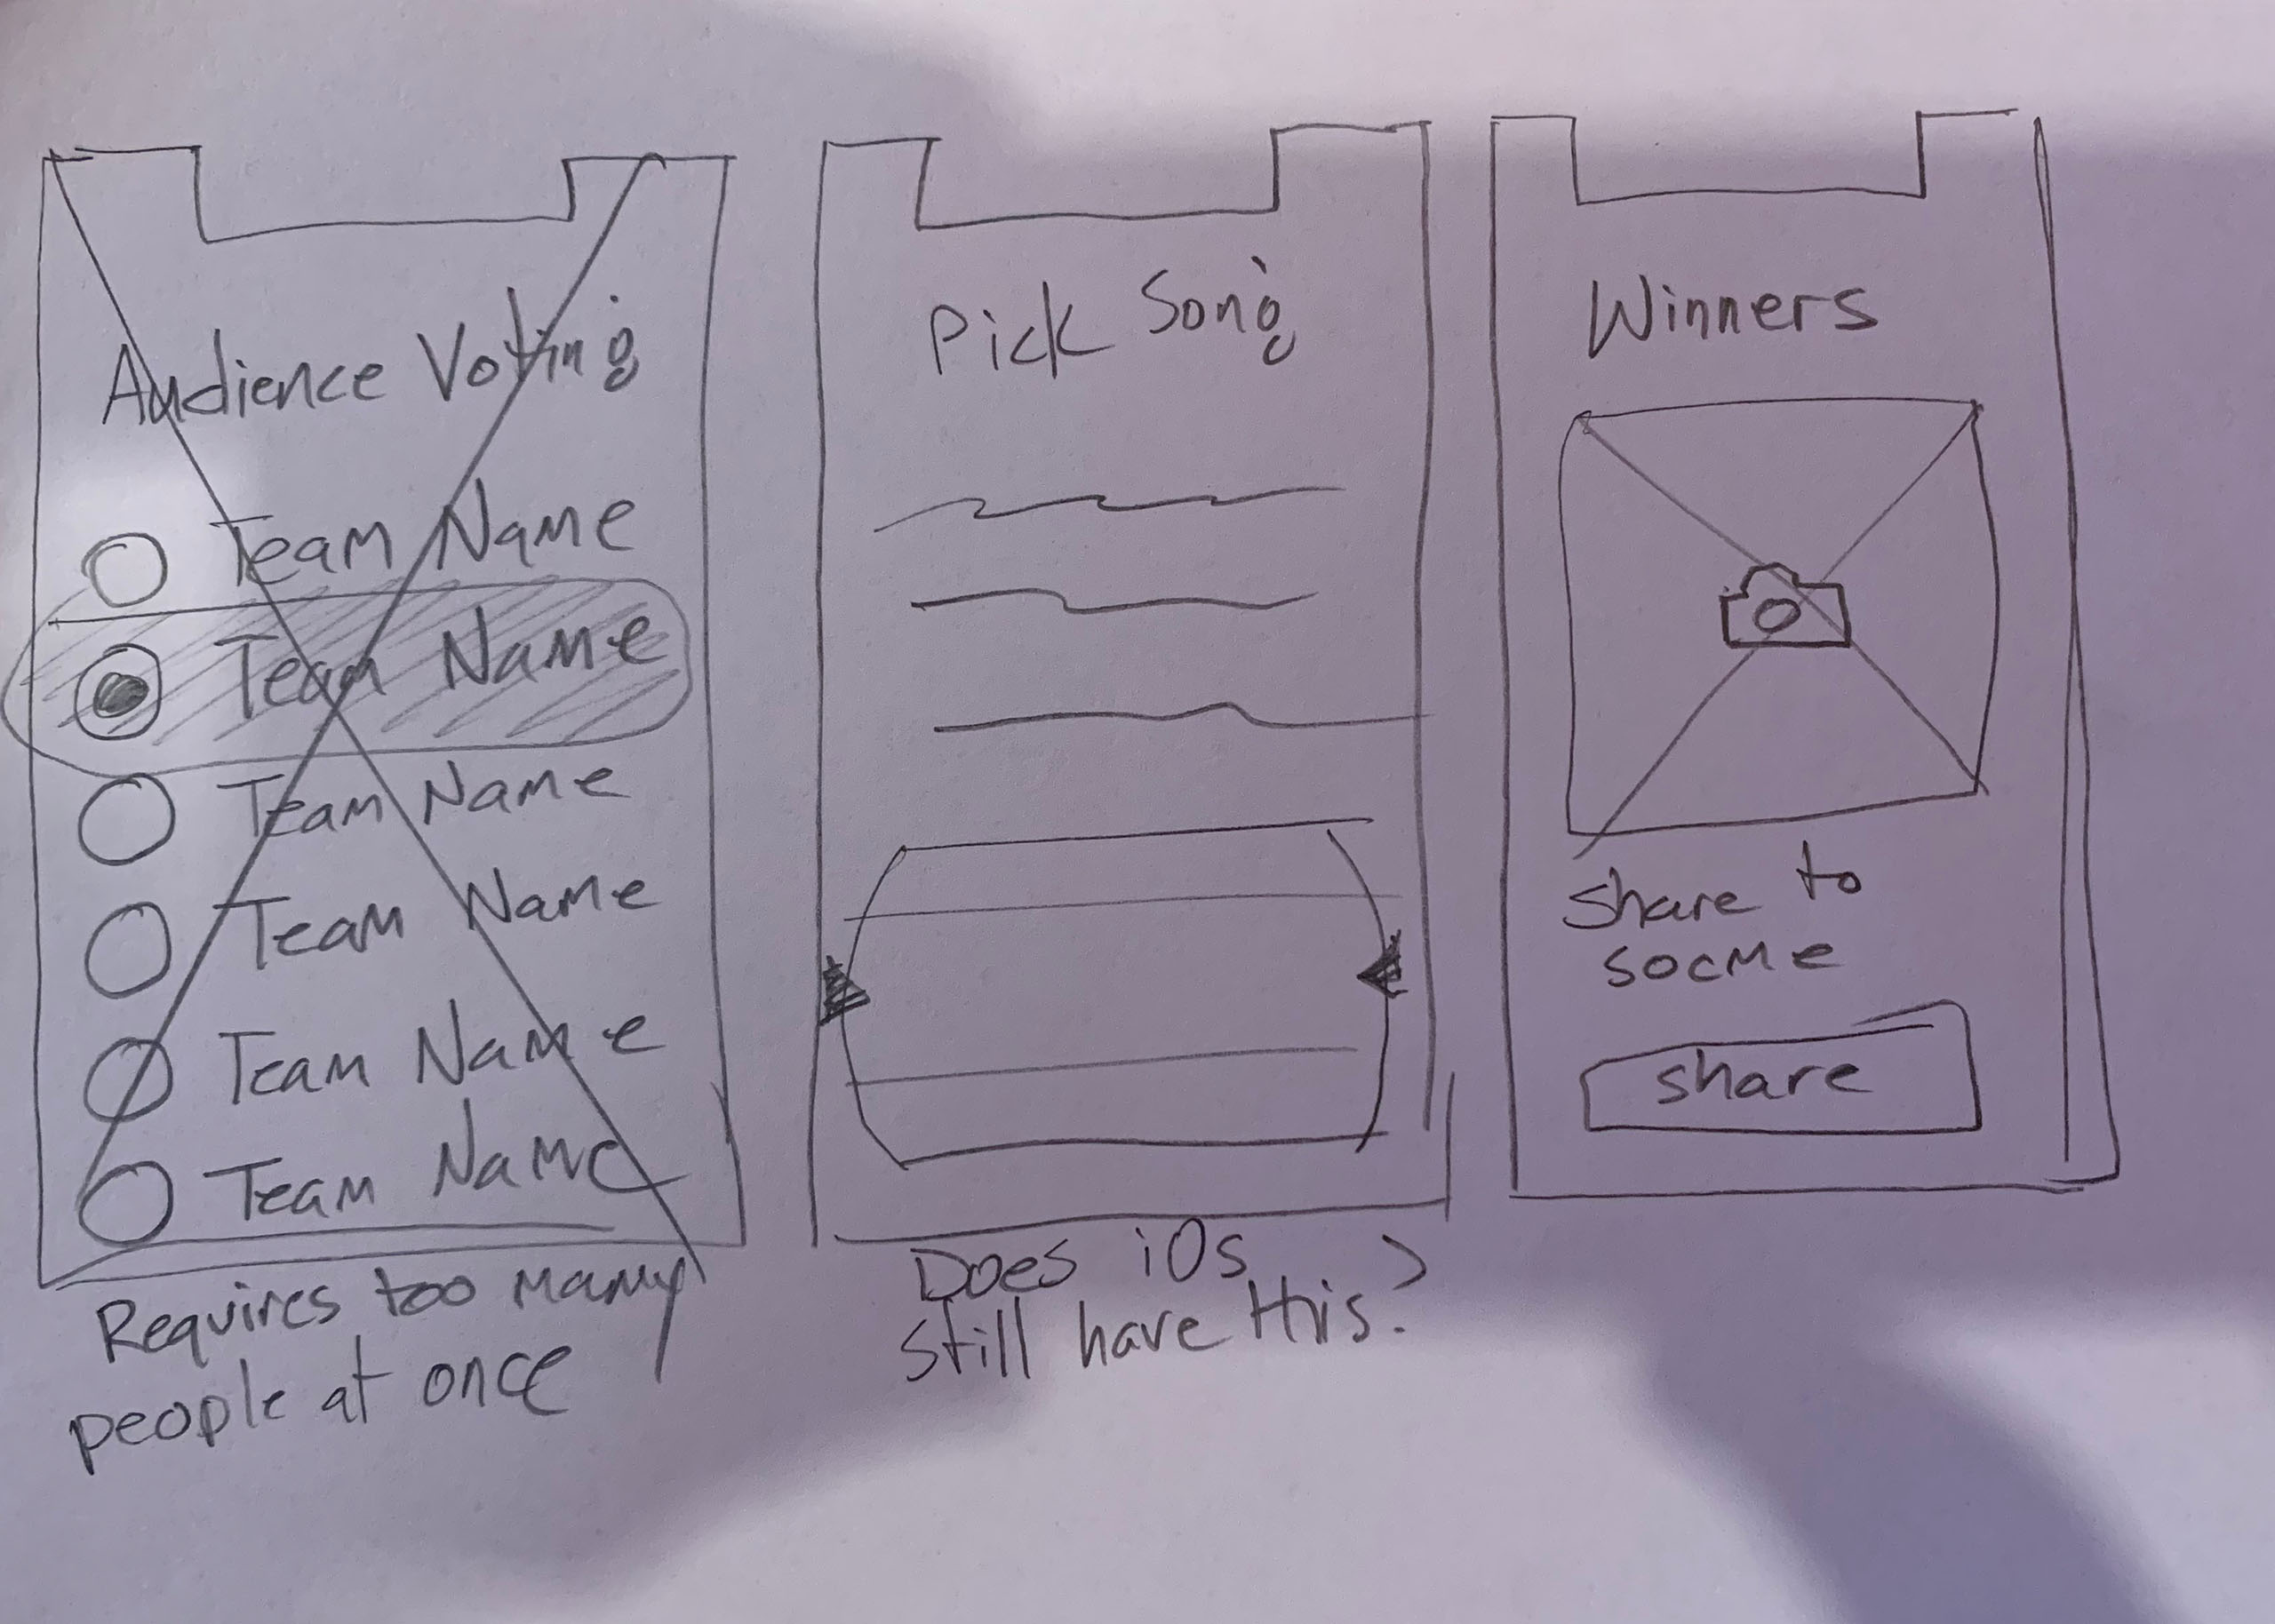 Hand sketches for song selection and winner screen. The sketch for audience voting has been crossed out.